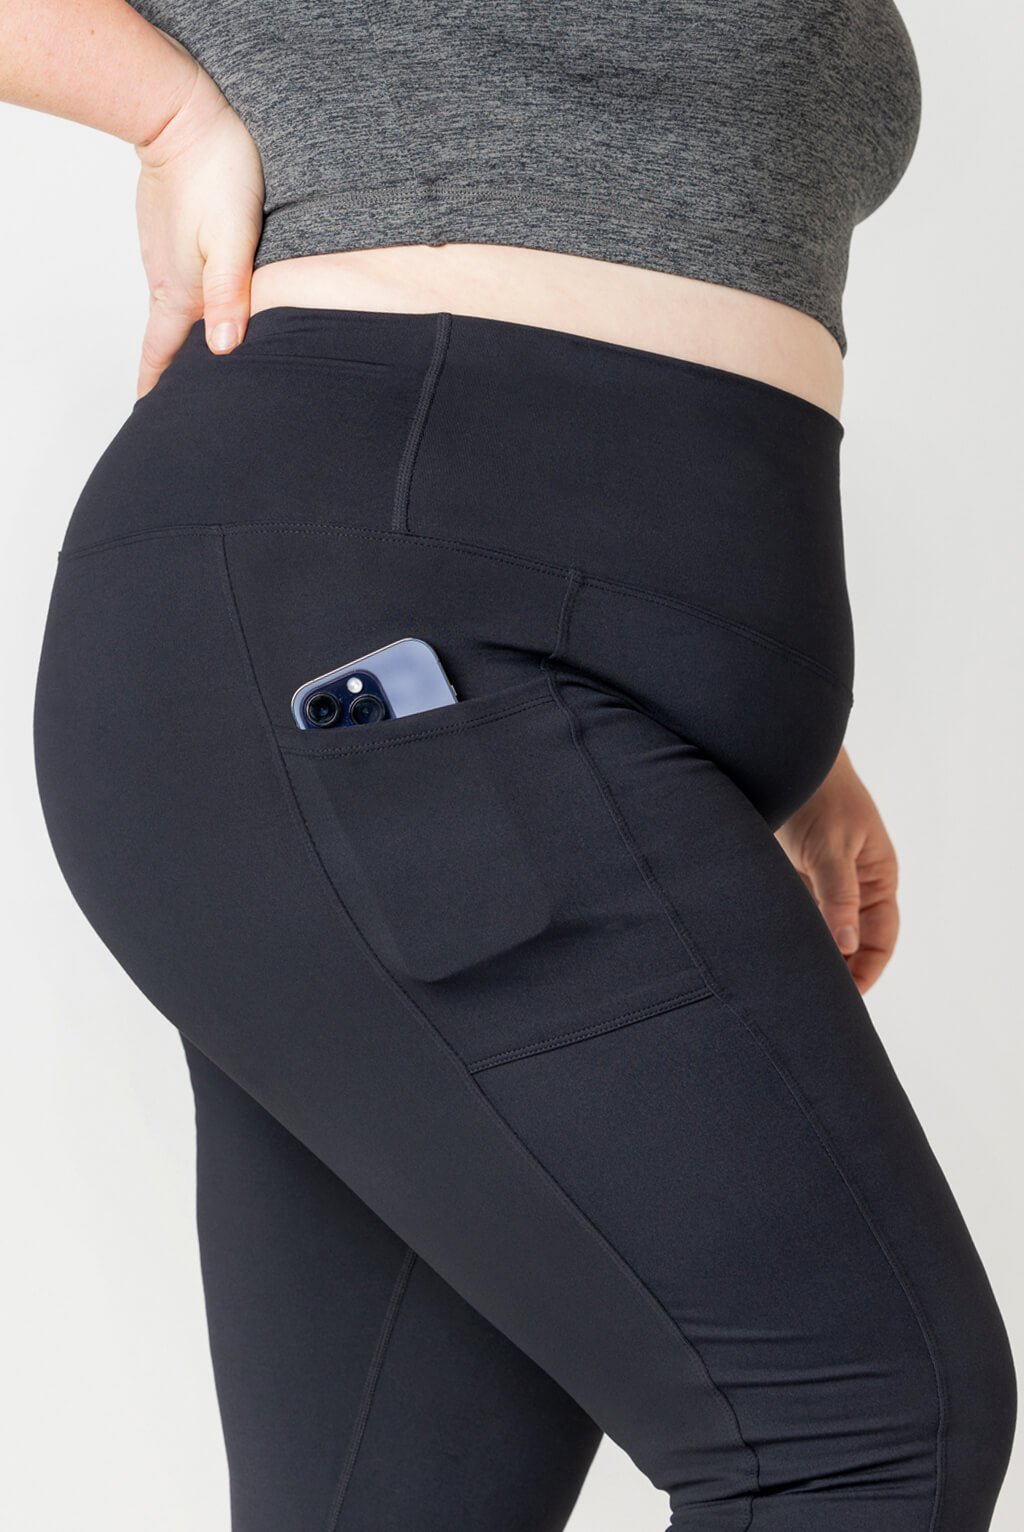 Detail shot of large pocket on side of Superfit Hero leggings with a full size phone in the pocket.